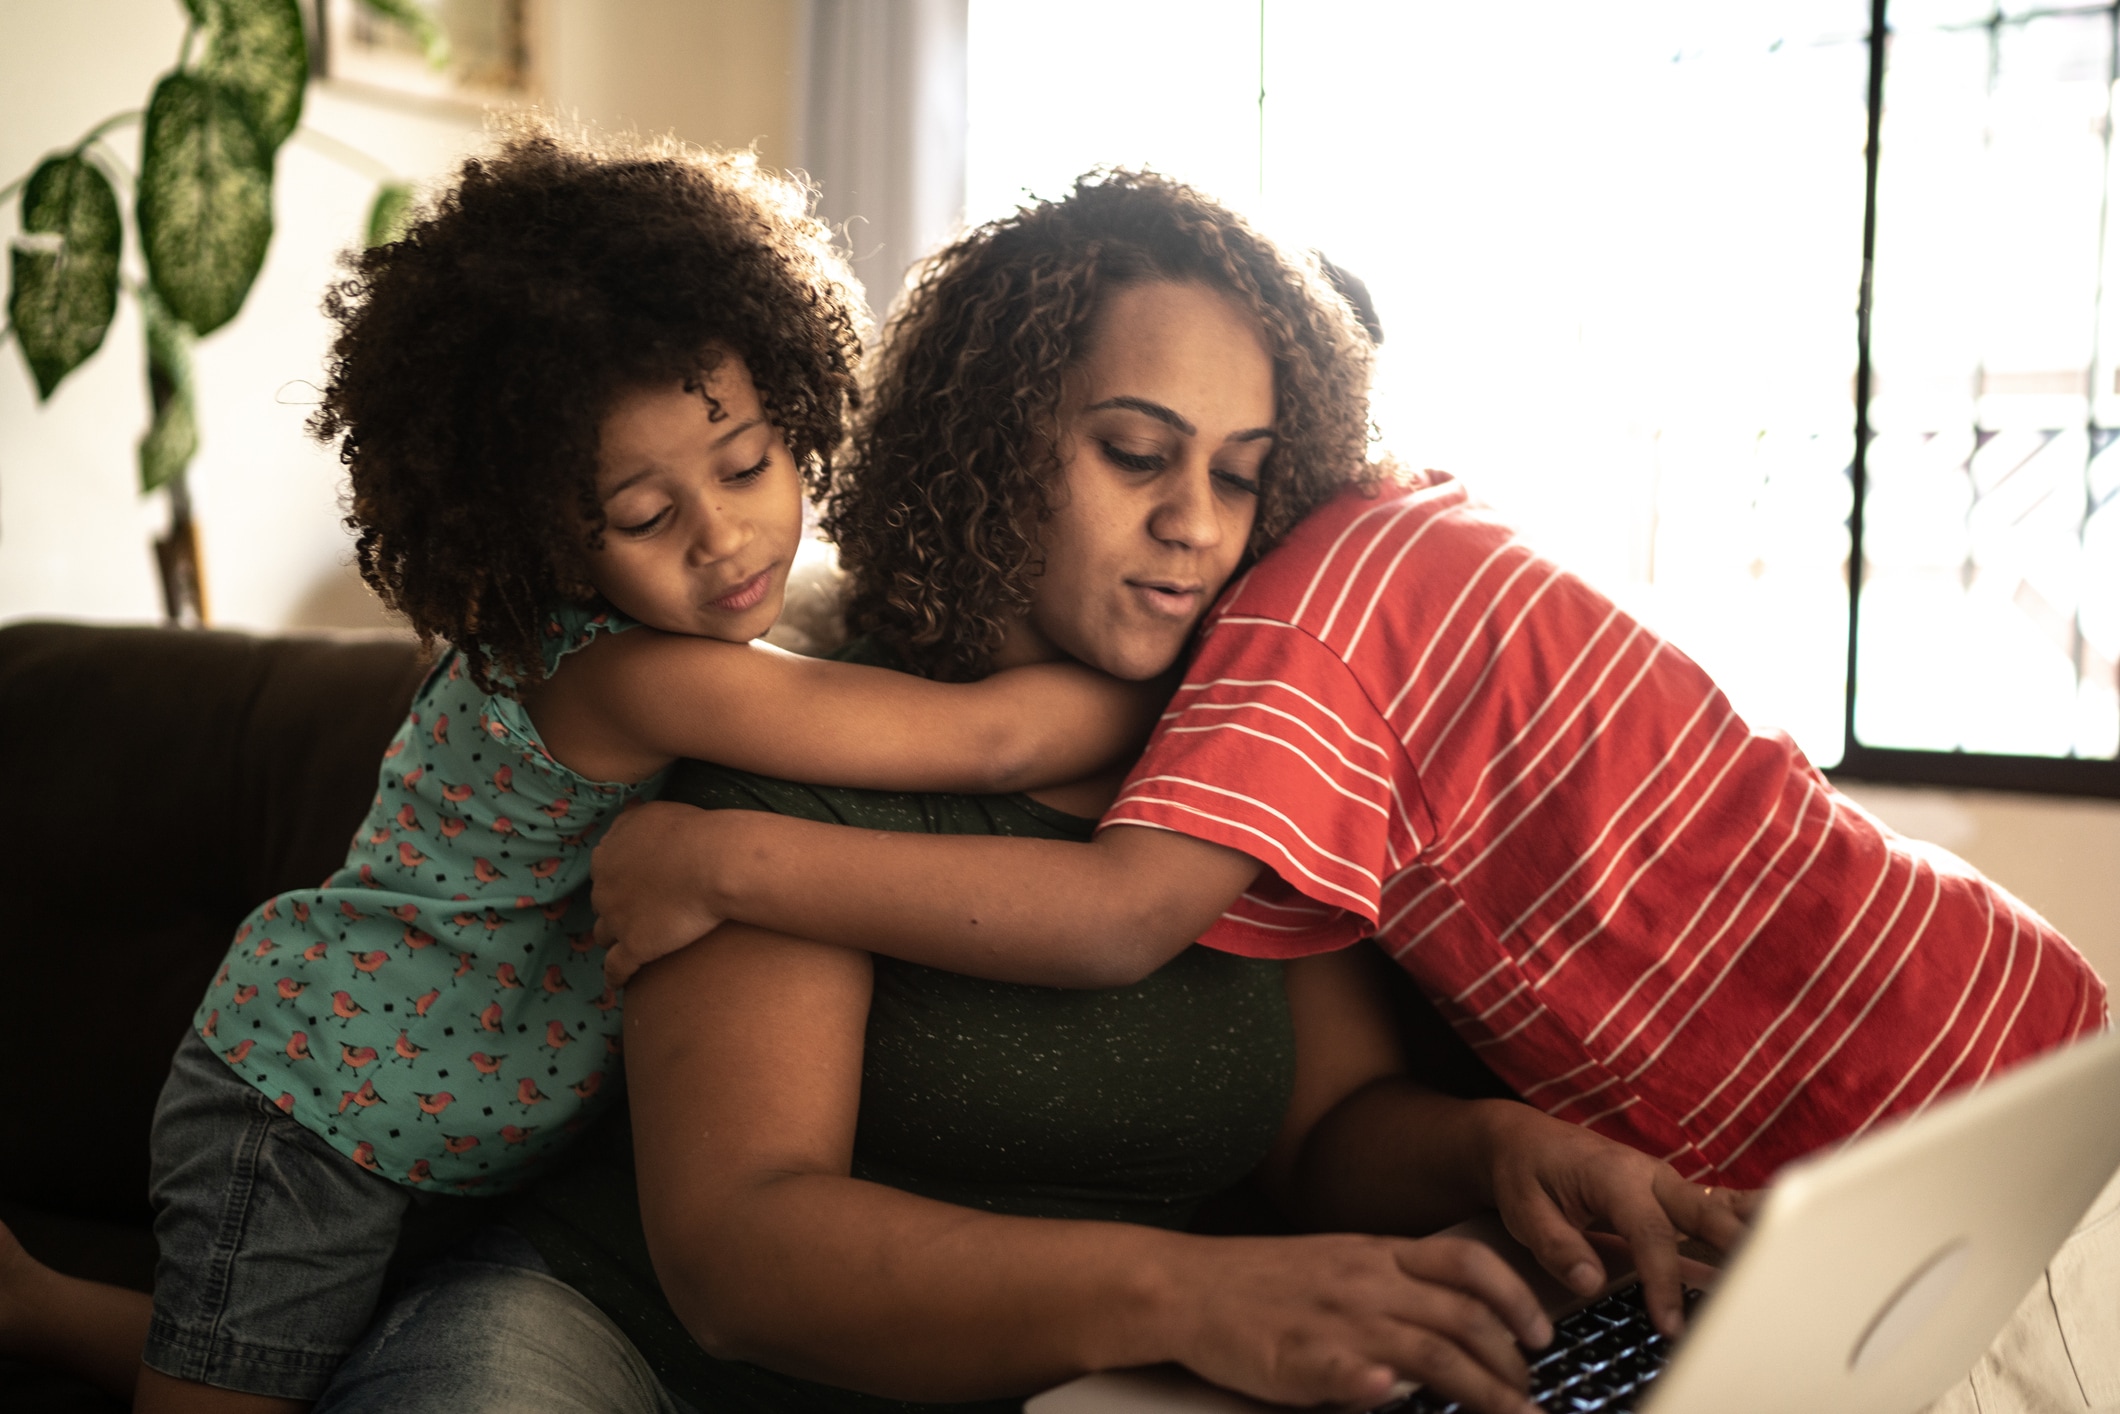 All moms are working moms: Why it’s time to embrace this once and for all